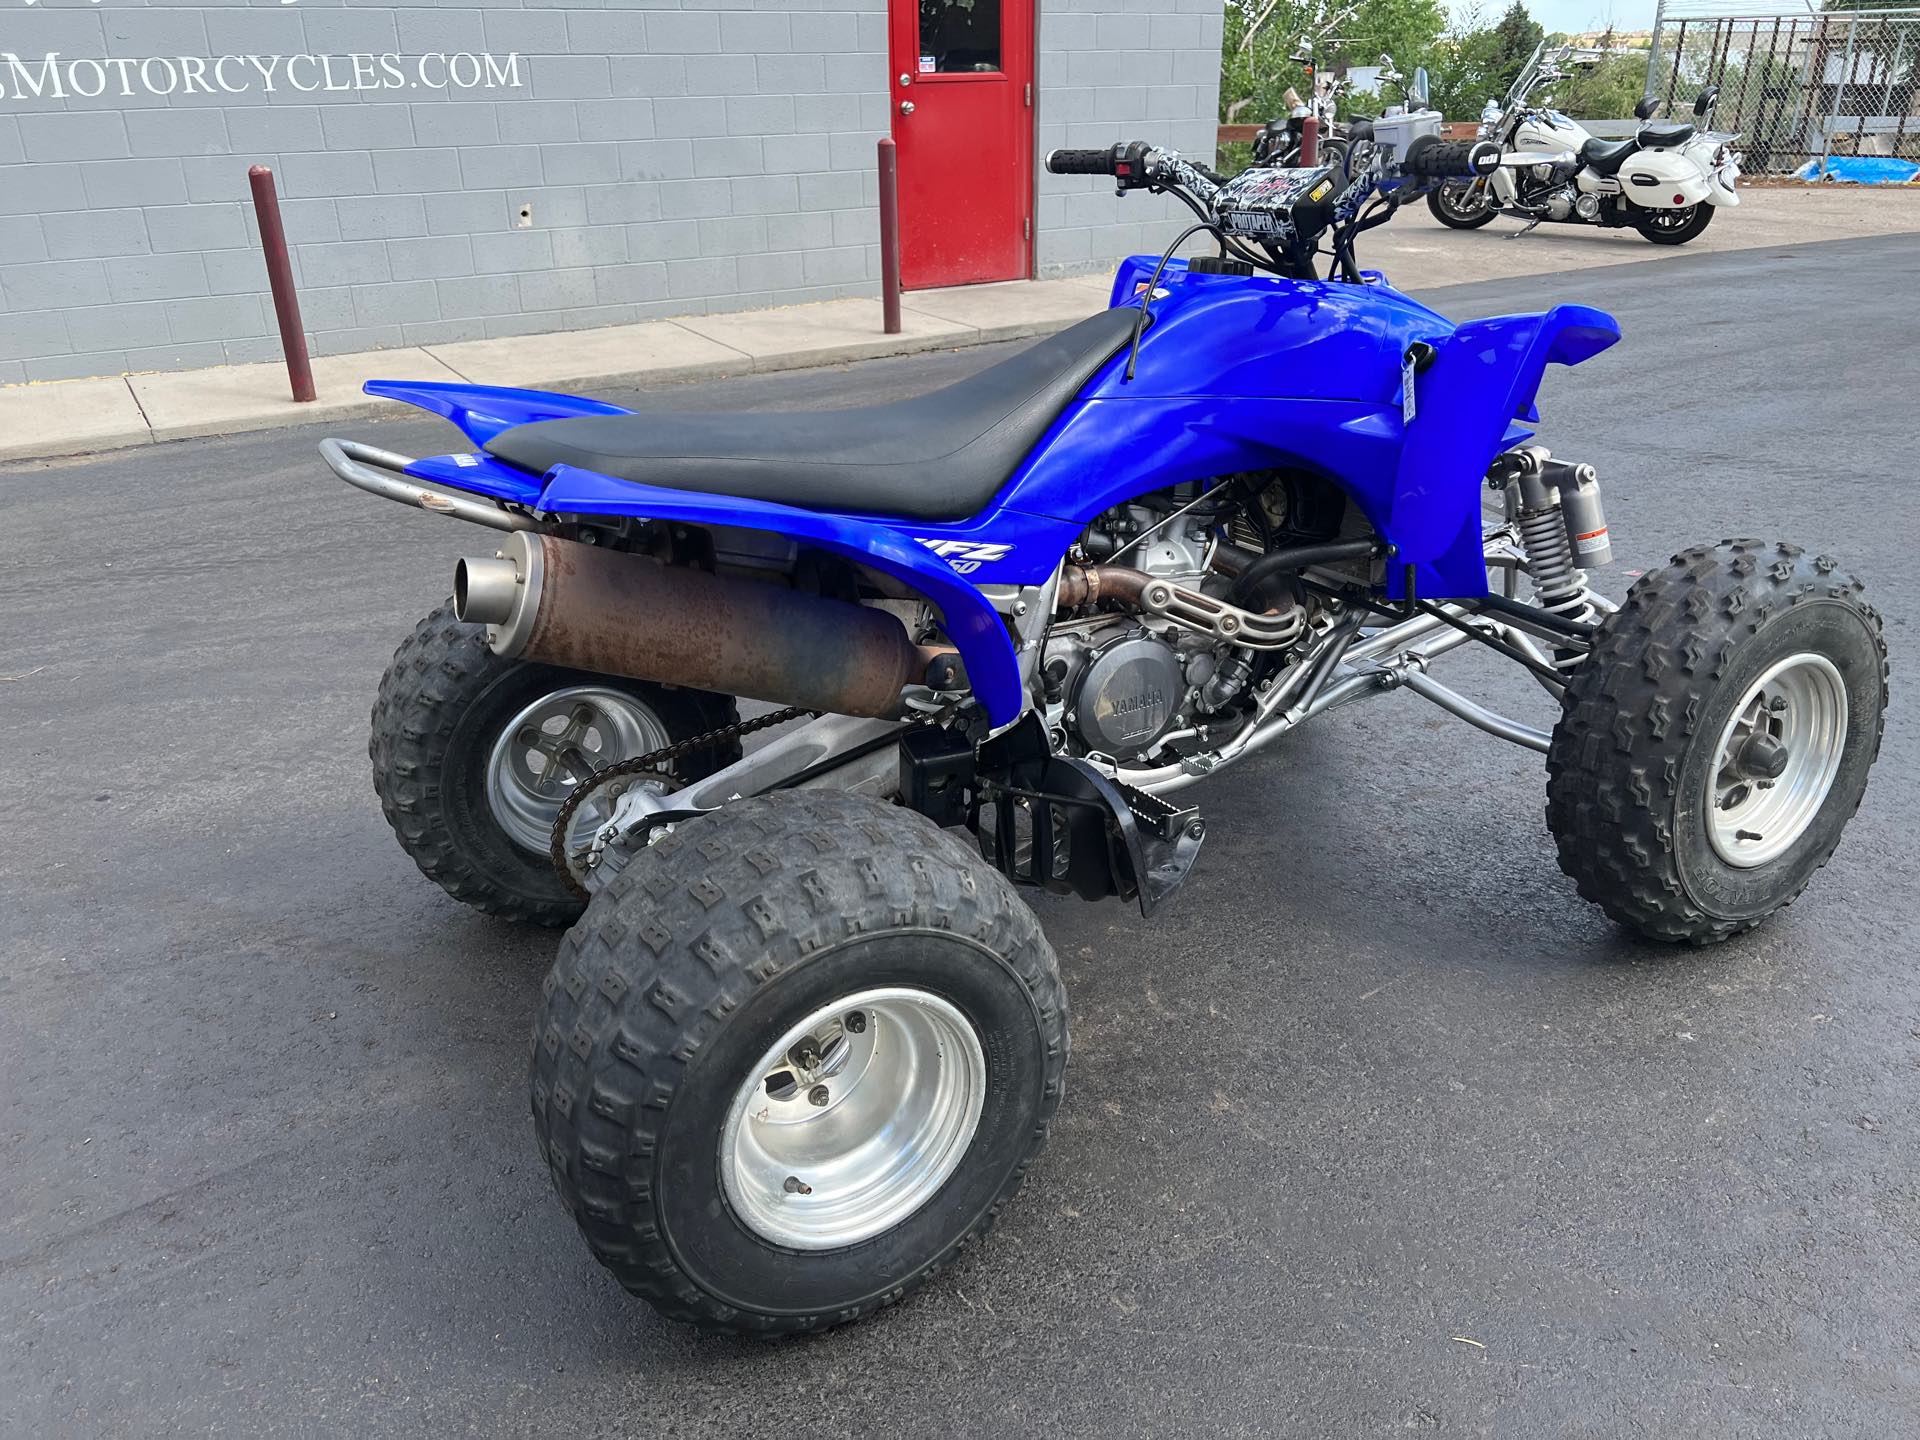 2005 Yamaha YFZ450 Base at Aces Motorcycles - Fort Collins